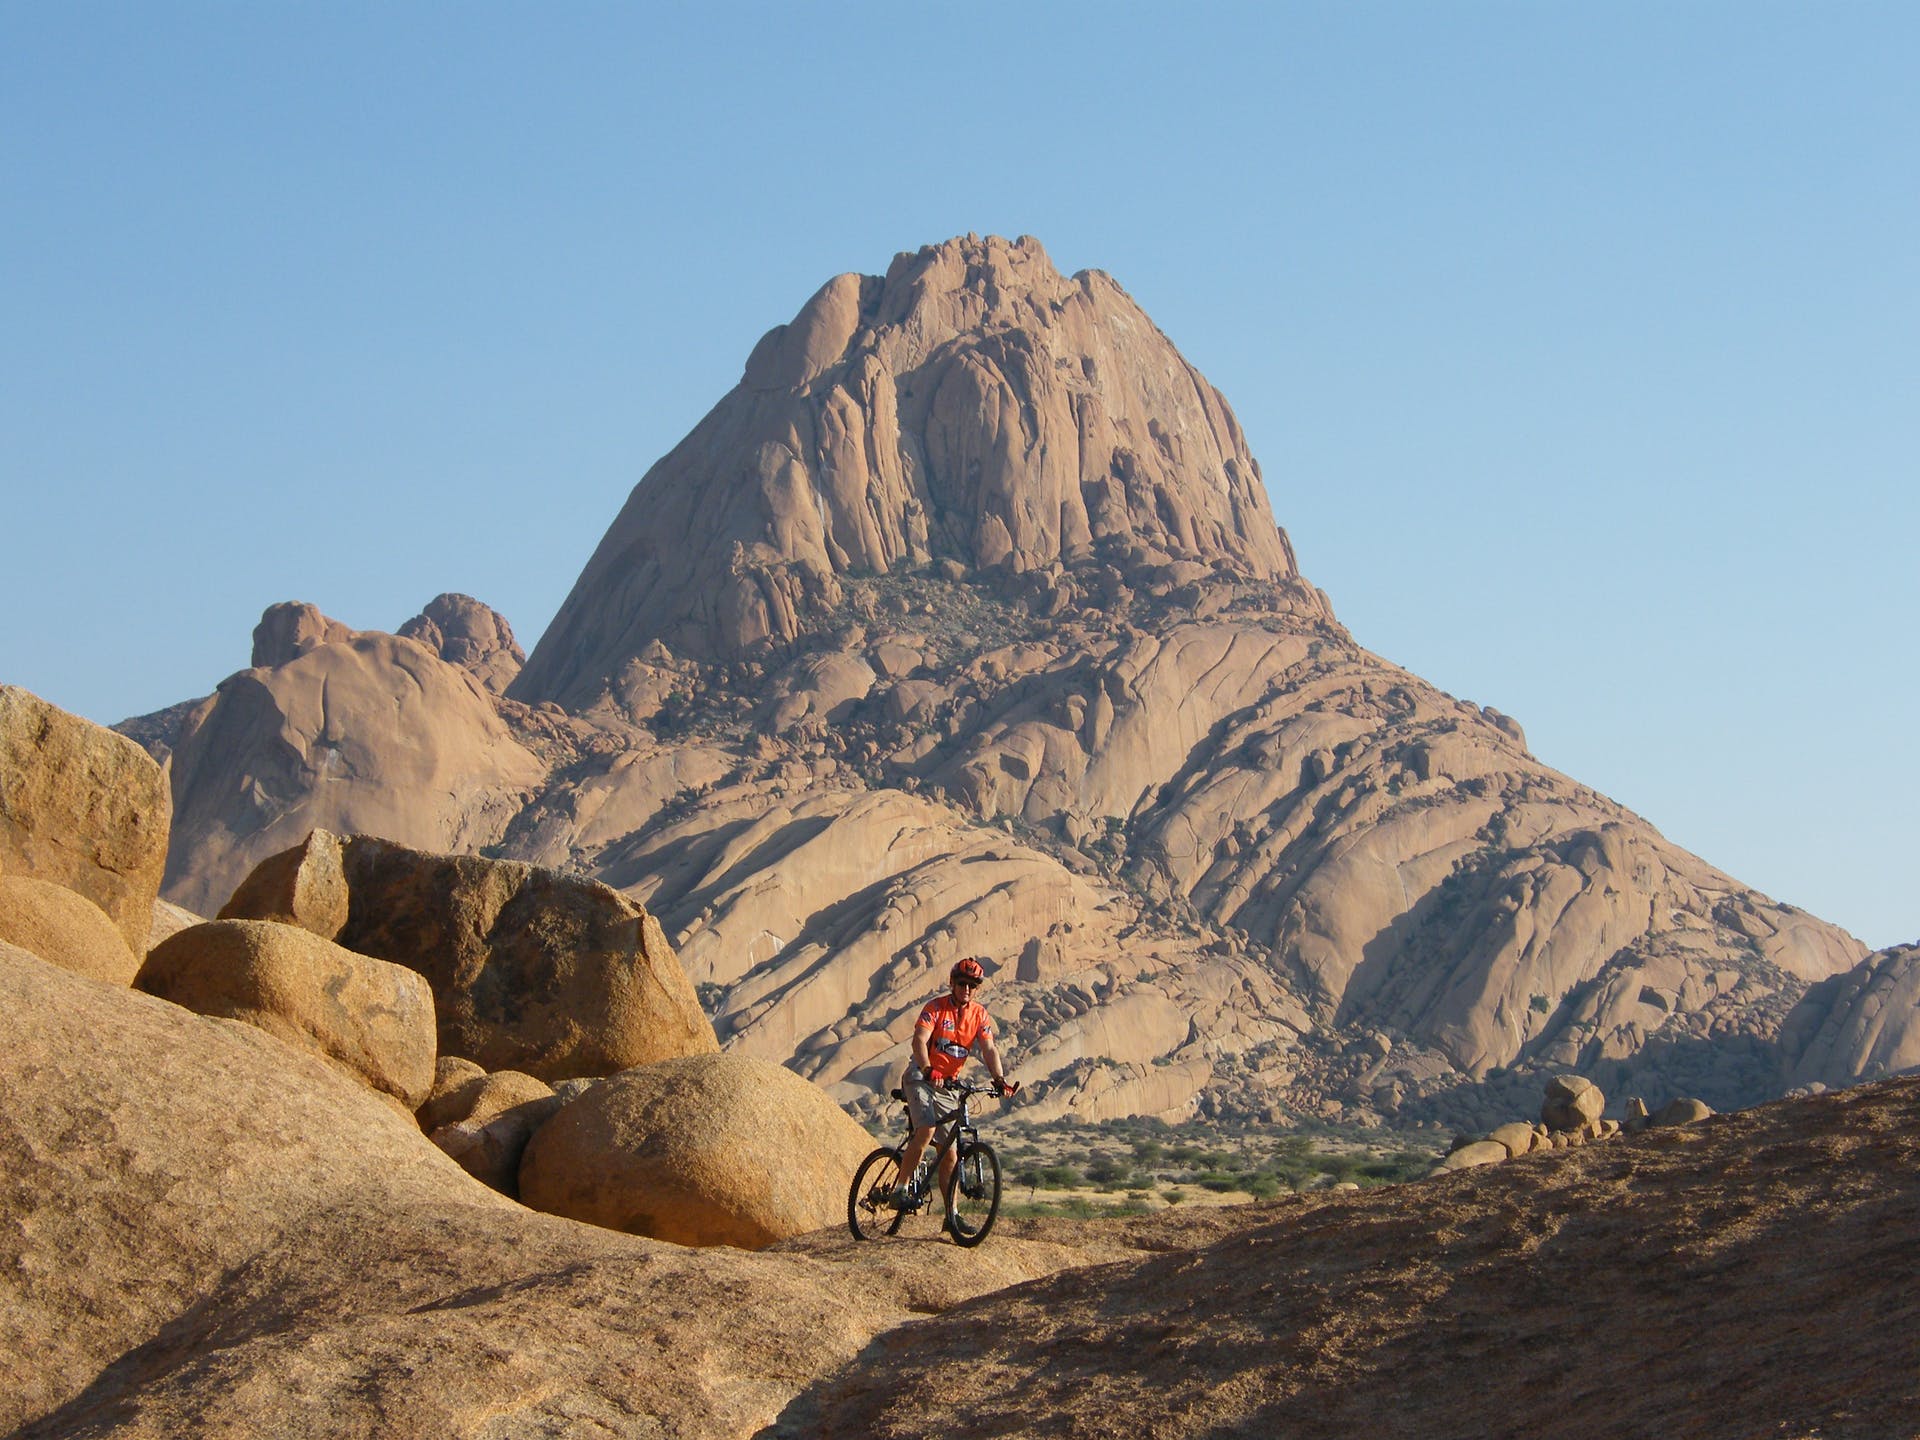 A cyclist in Namibia, with Spitzkoppe Mountain in the background.